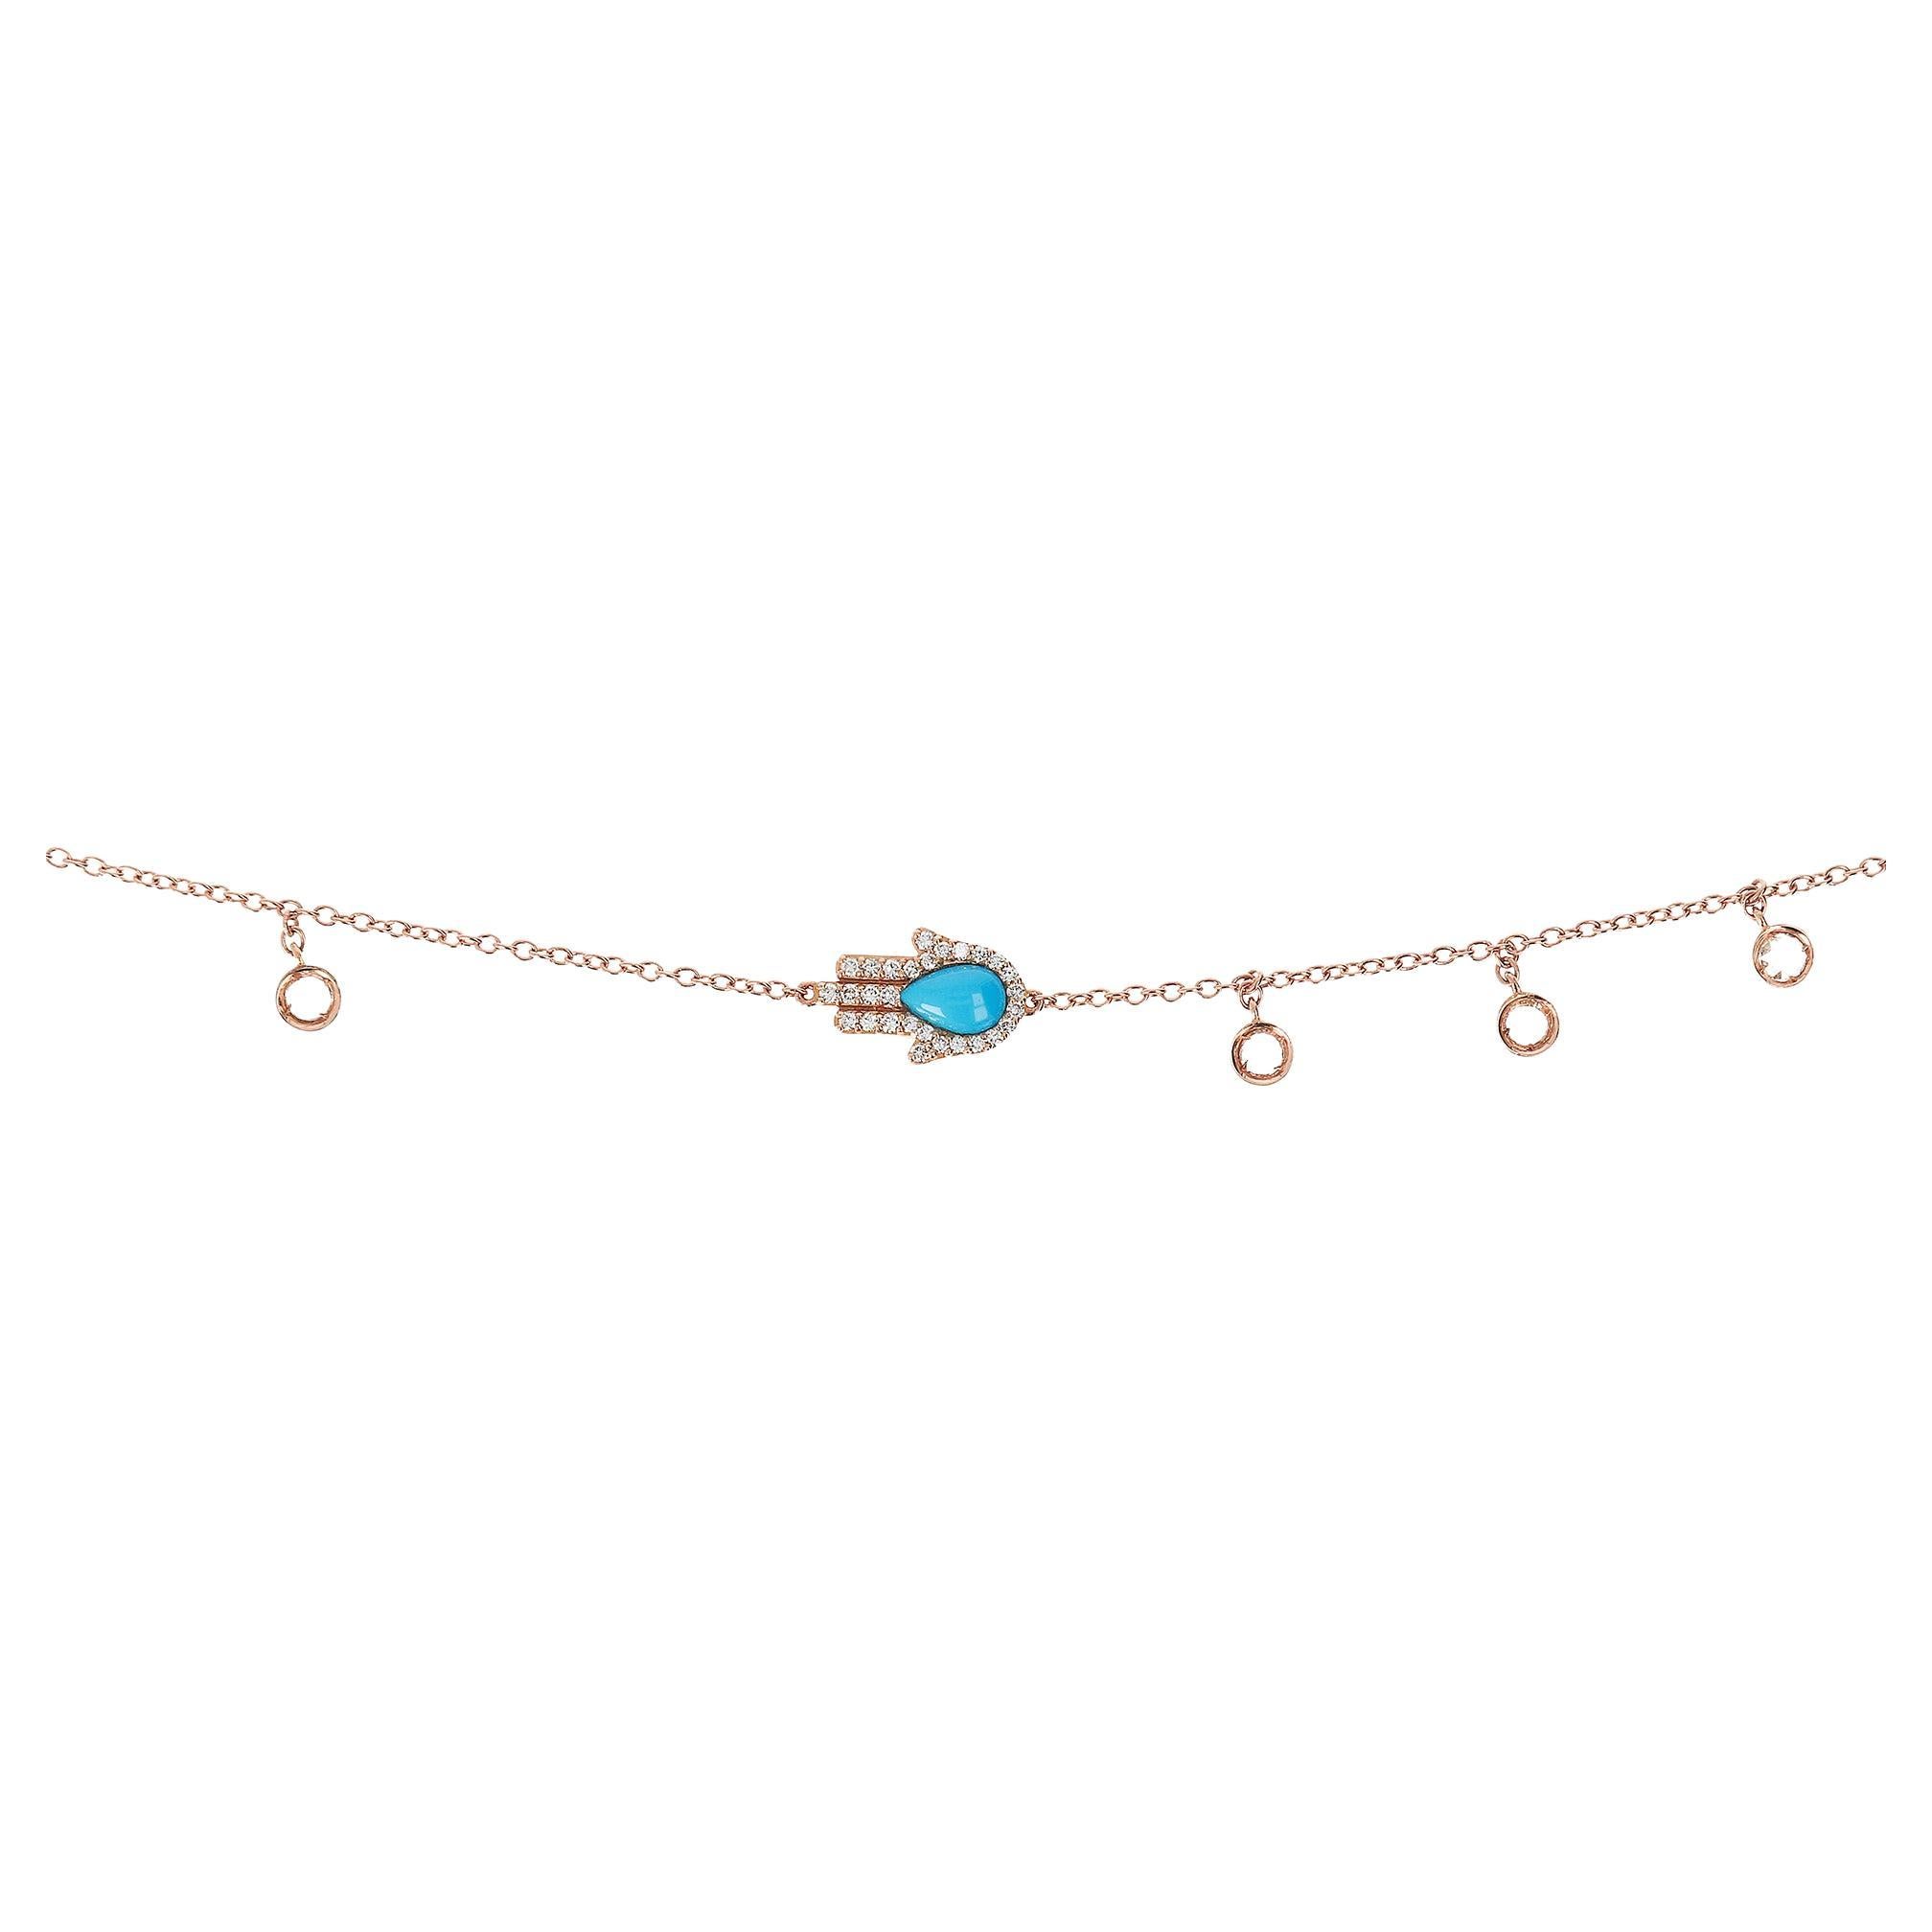 18kt gold necklace with diamond & turquoise hand and dangling rose-cut diamonds